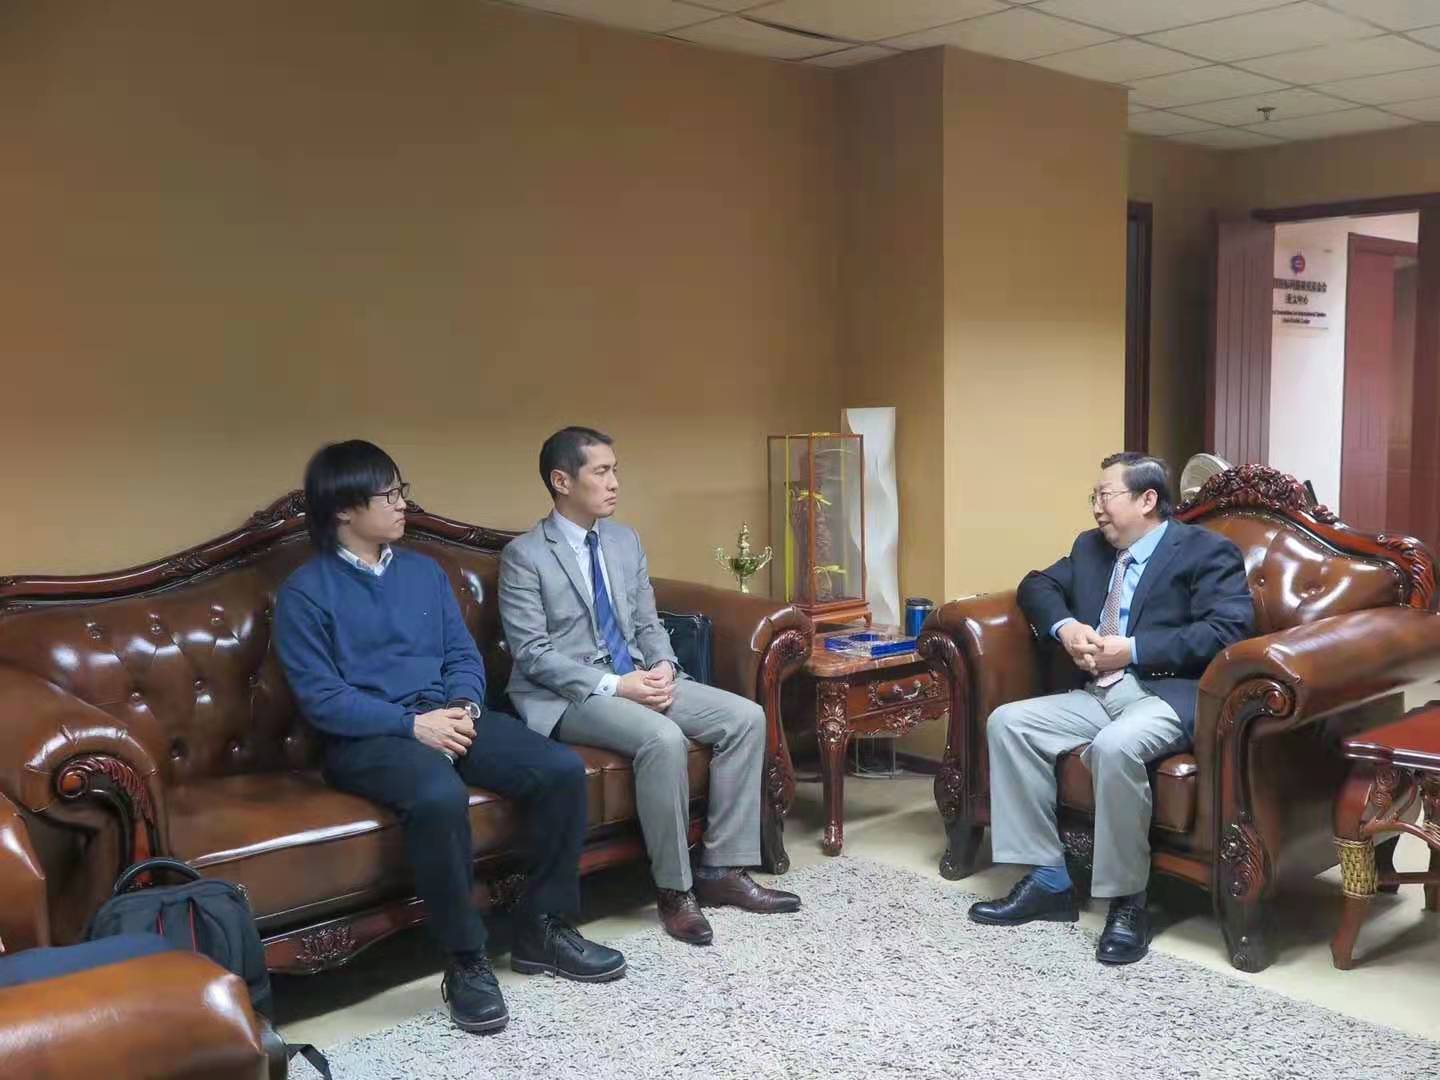 Mr.Xu met with Mr. Shigekazu Fukunaga, Commercial Counselor of the Japanese Embassy in China